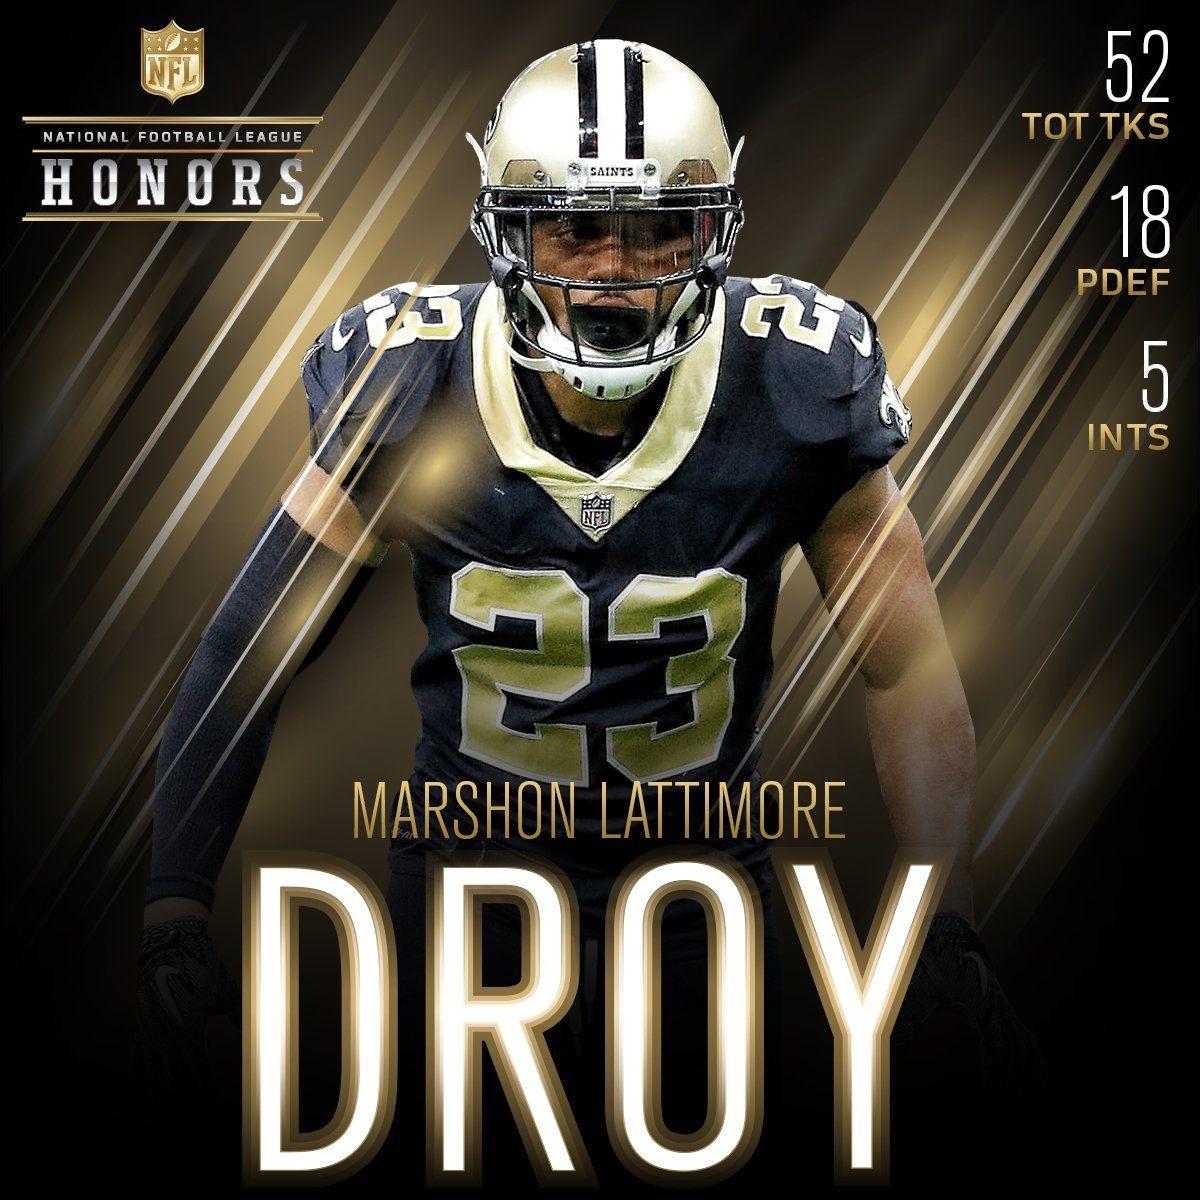 Saints CB is the 2017 Defensive Rookie of the Year